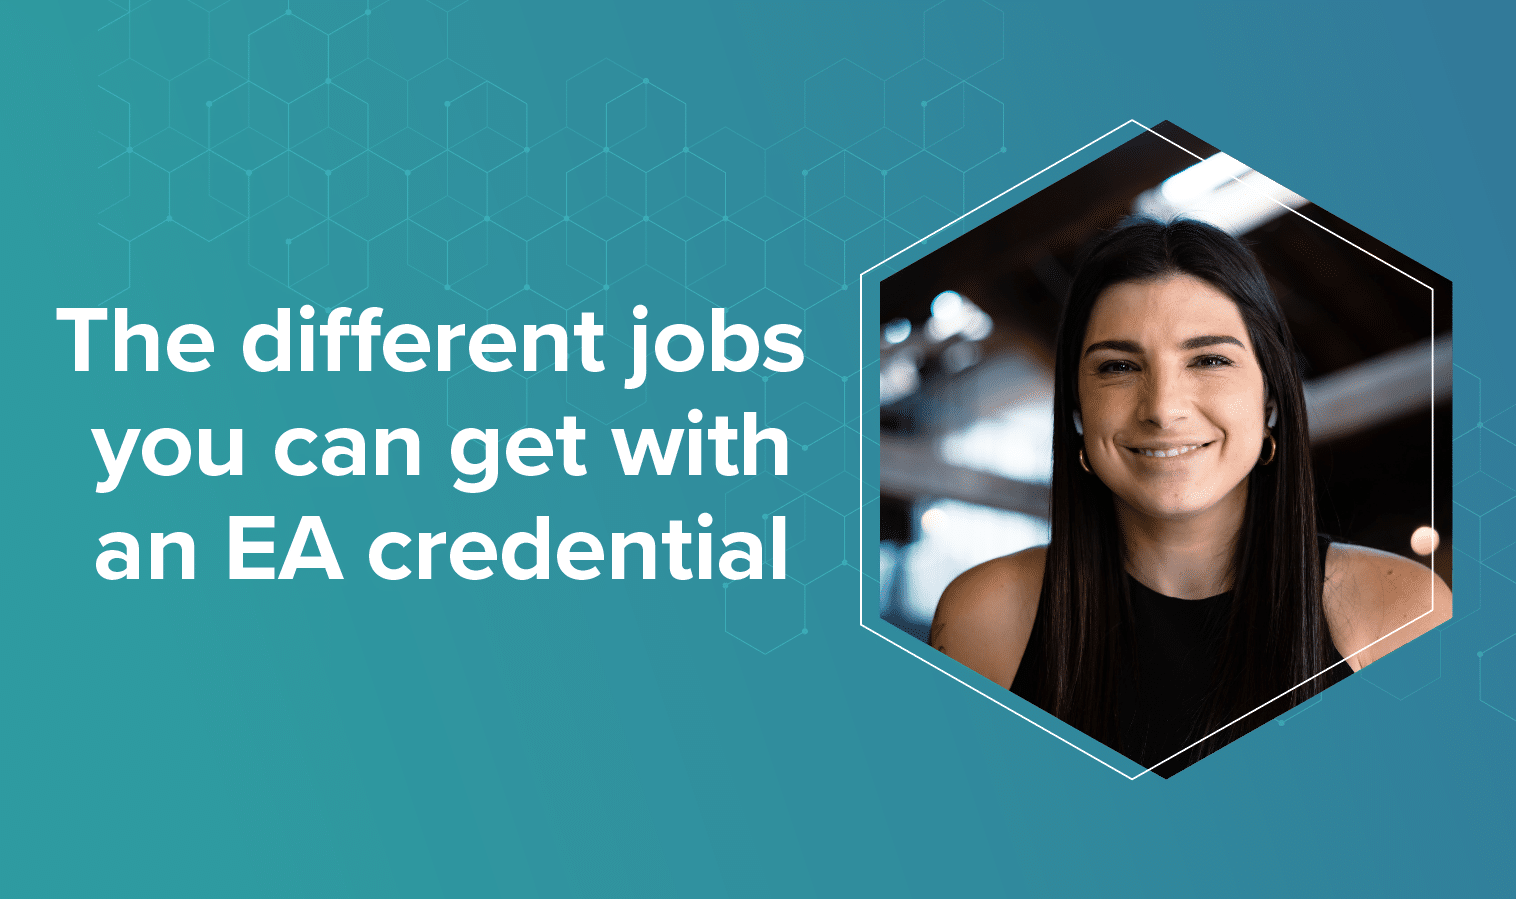 The different jobs you can get with an EA credential